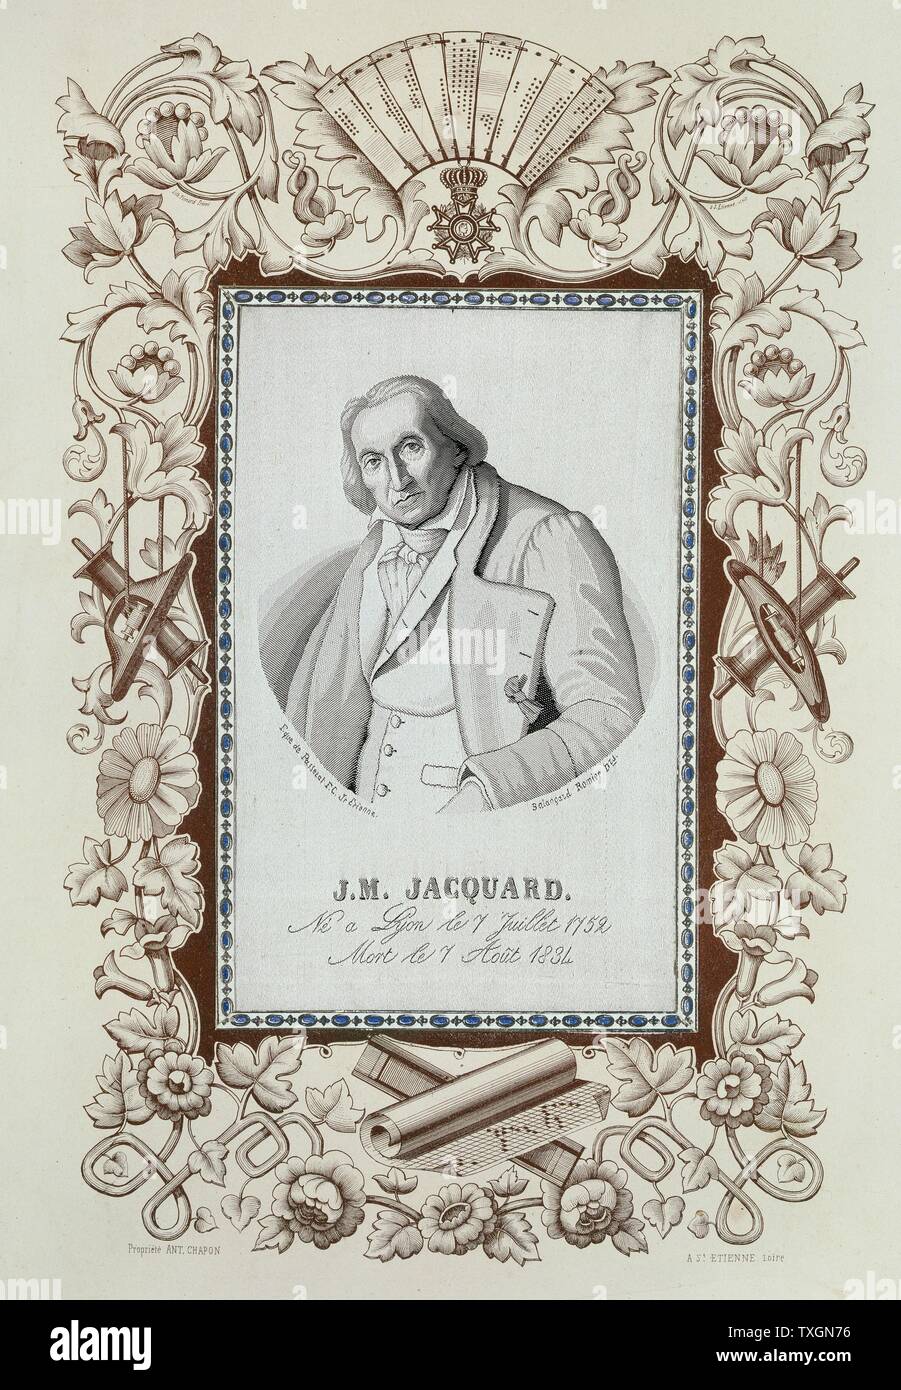 Jacquard, Joseph Marie (1752-1834)  French silk-weaver and inventor.  Portrait woven by Jacquard loom, surrounded by printed border showing punched cards, paper for designing patterns, shuttles, bobbins, etc. Colour Stock Photo